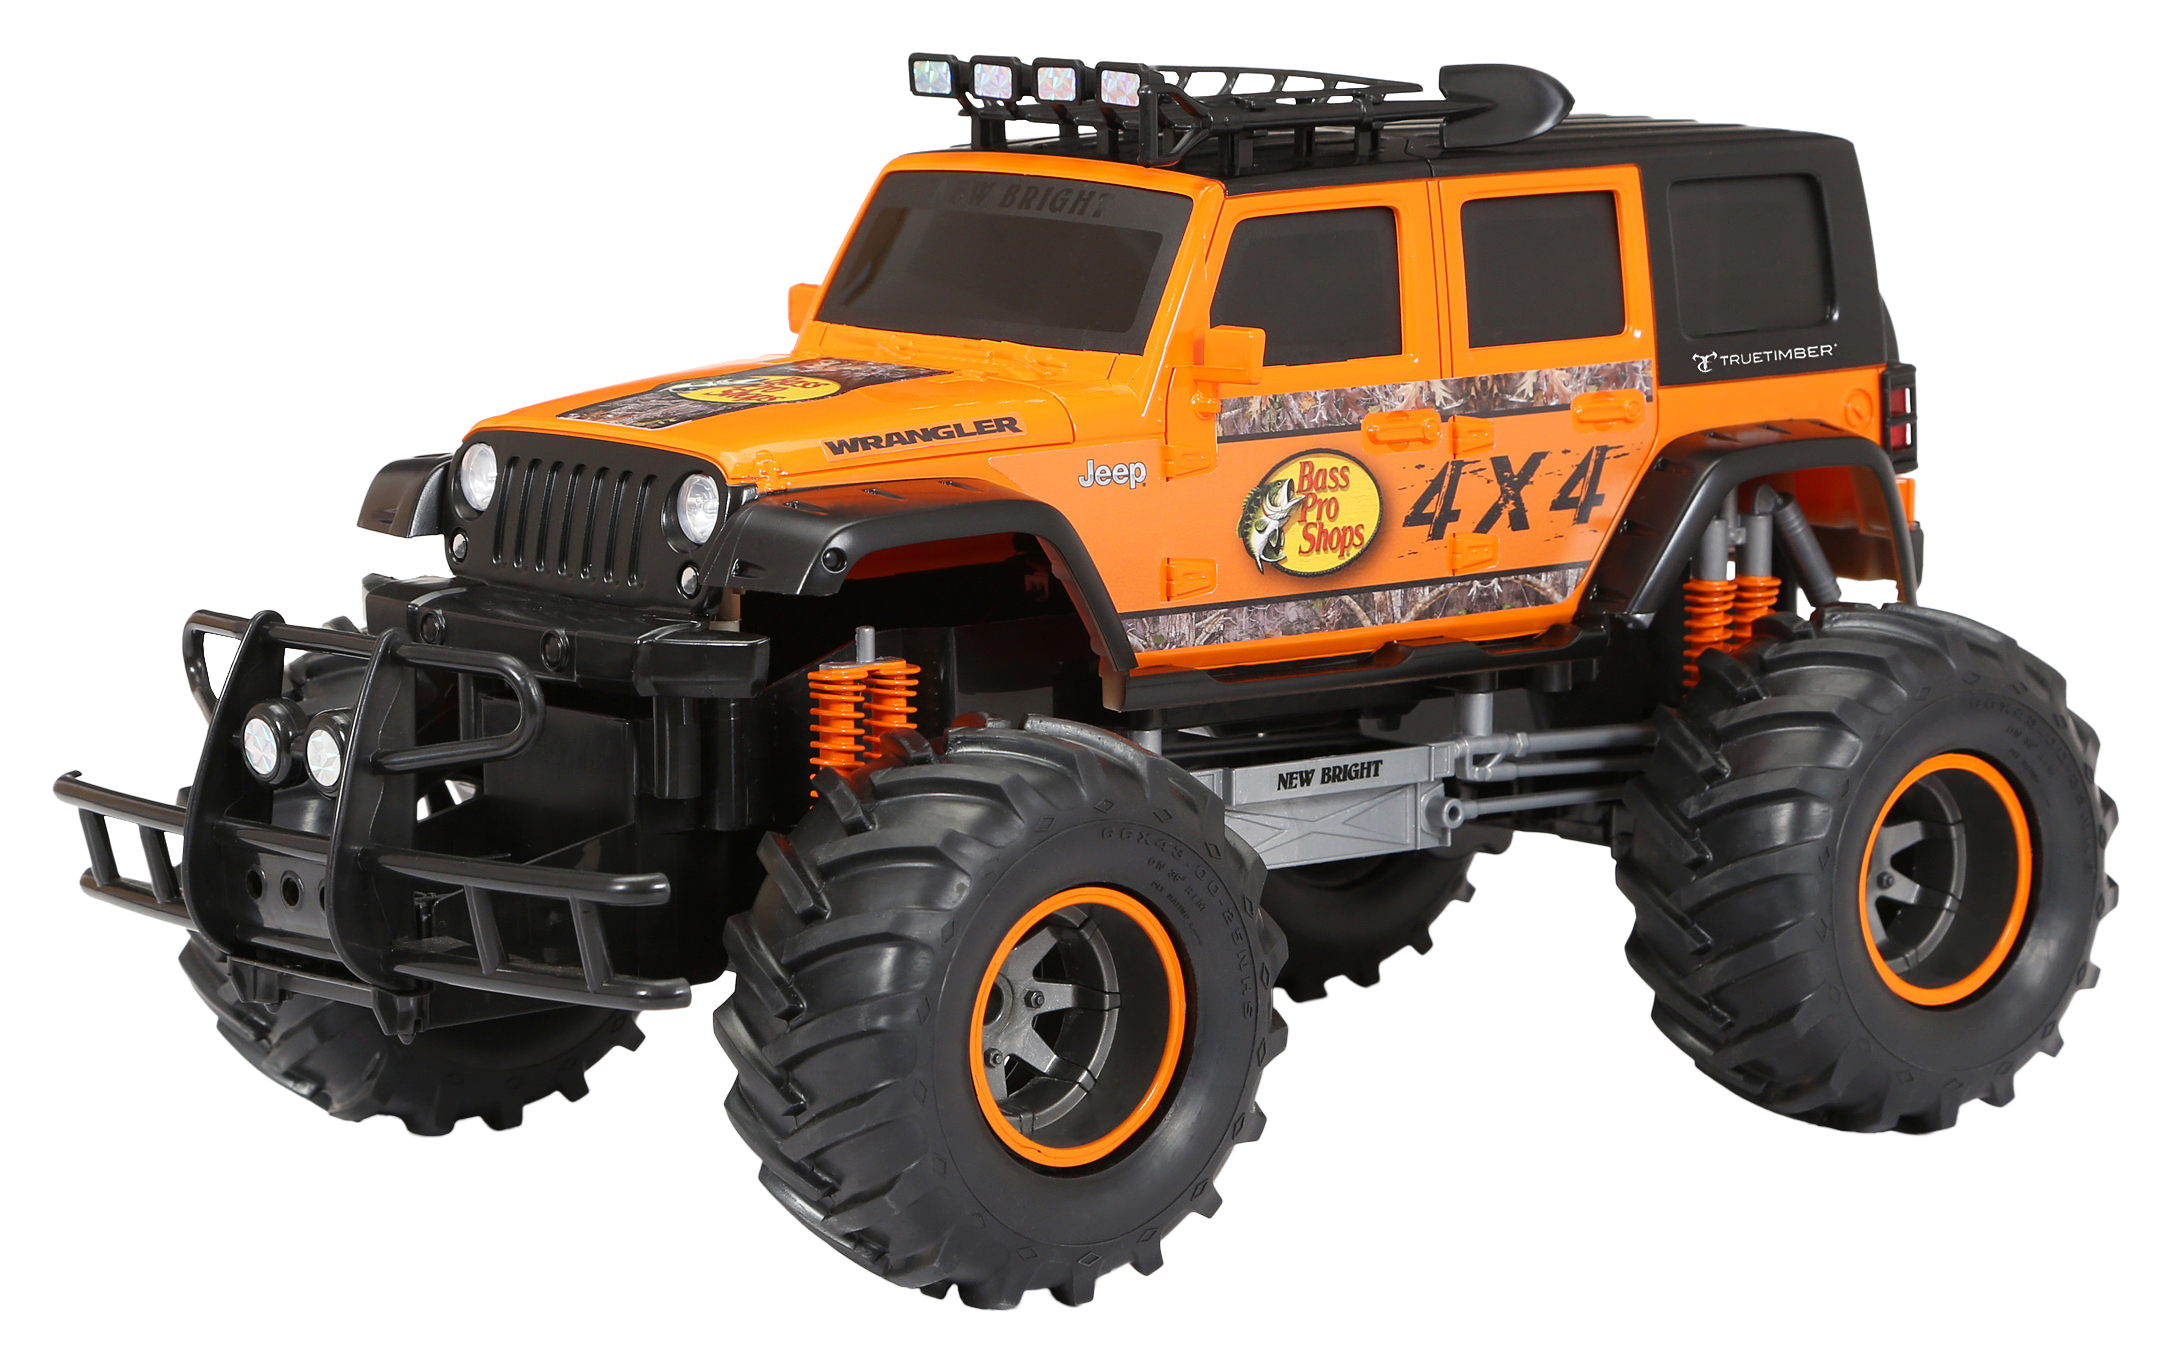 Bass Pro Shops 1:12 Jeep Wrangler 4×4 Remote-Control Off-Road